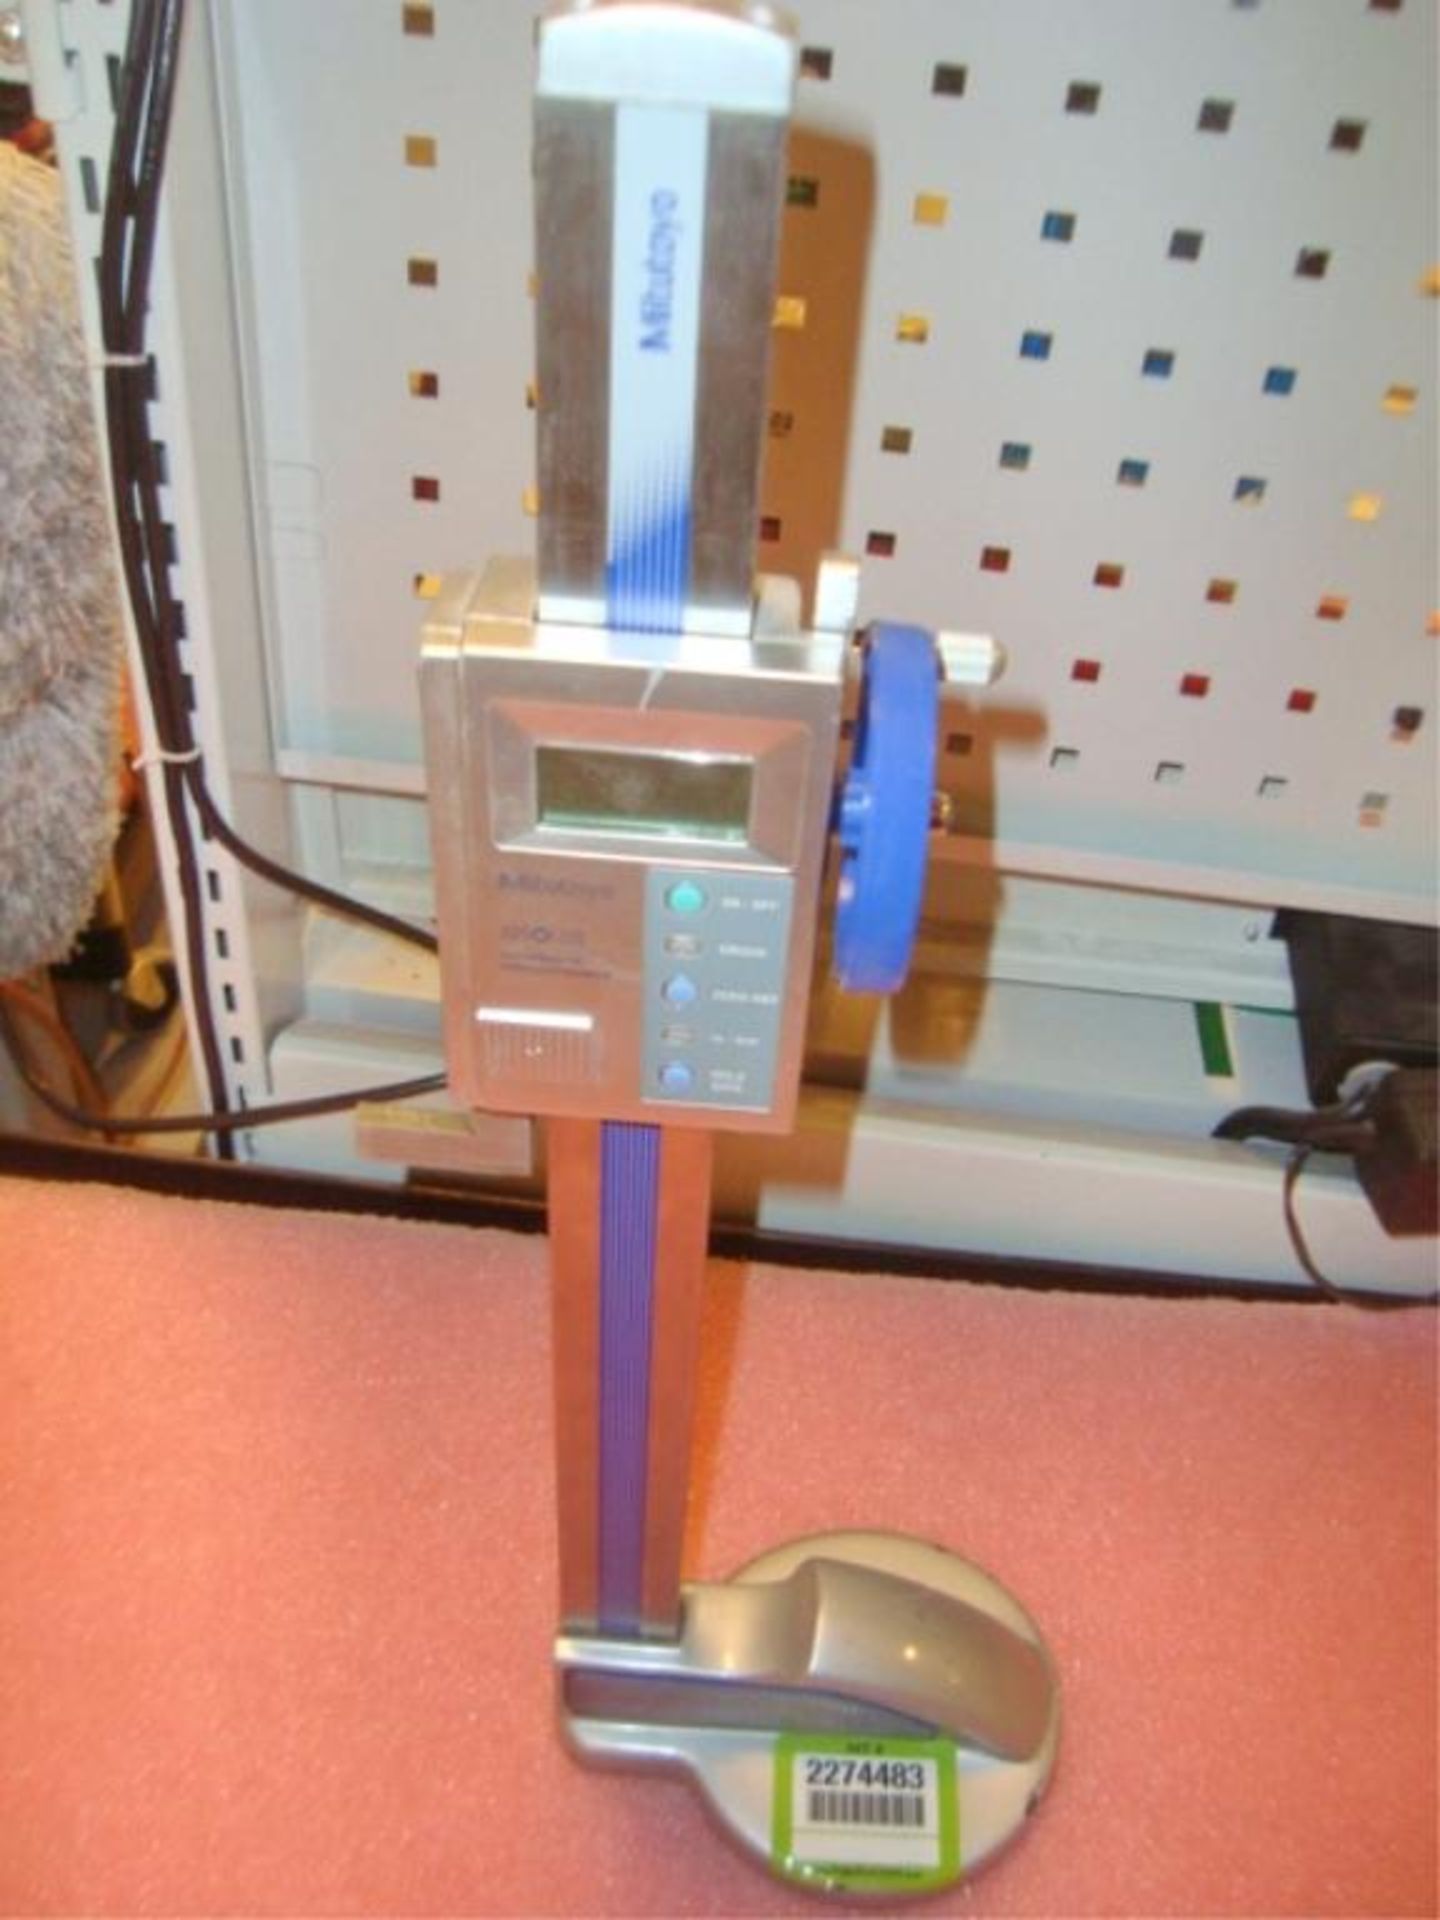 Absolute Digimatic 12" in. Height Gage - Image 3 of 4